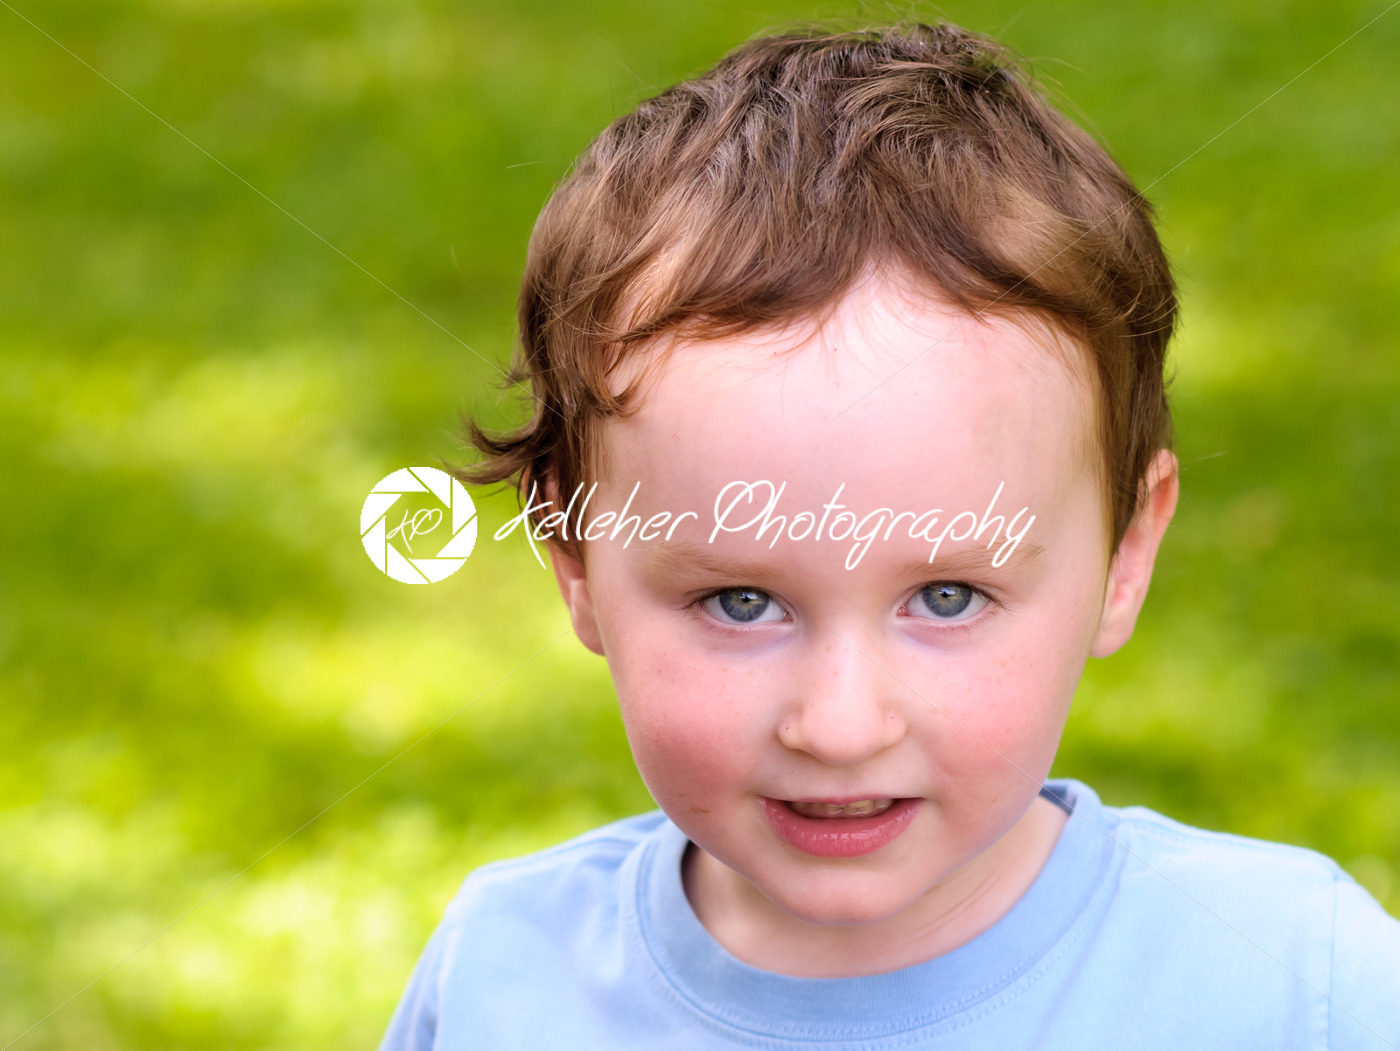 Portrait of a happy liitle boy close-up - Kelleher Photography Store